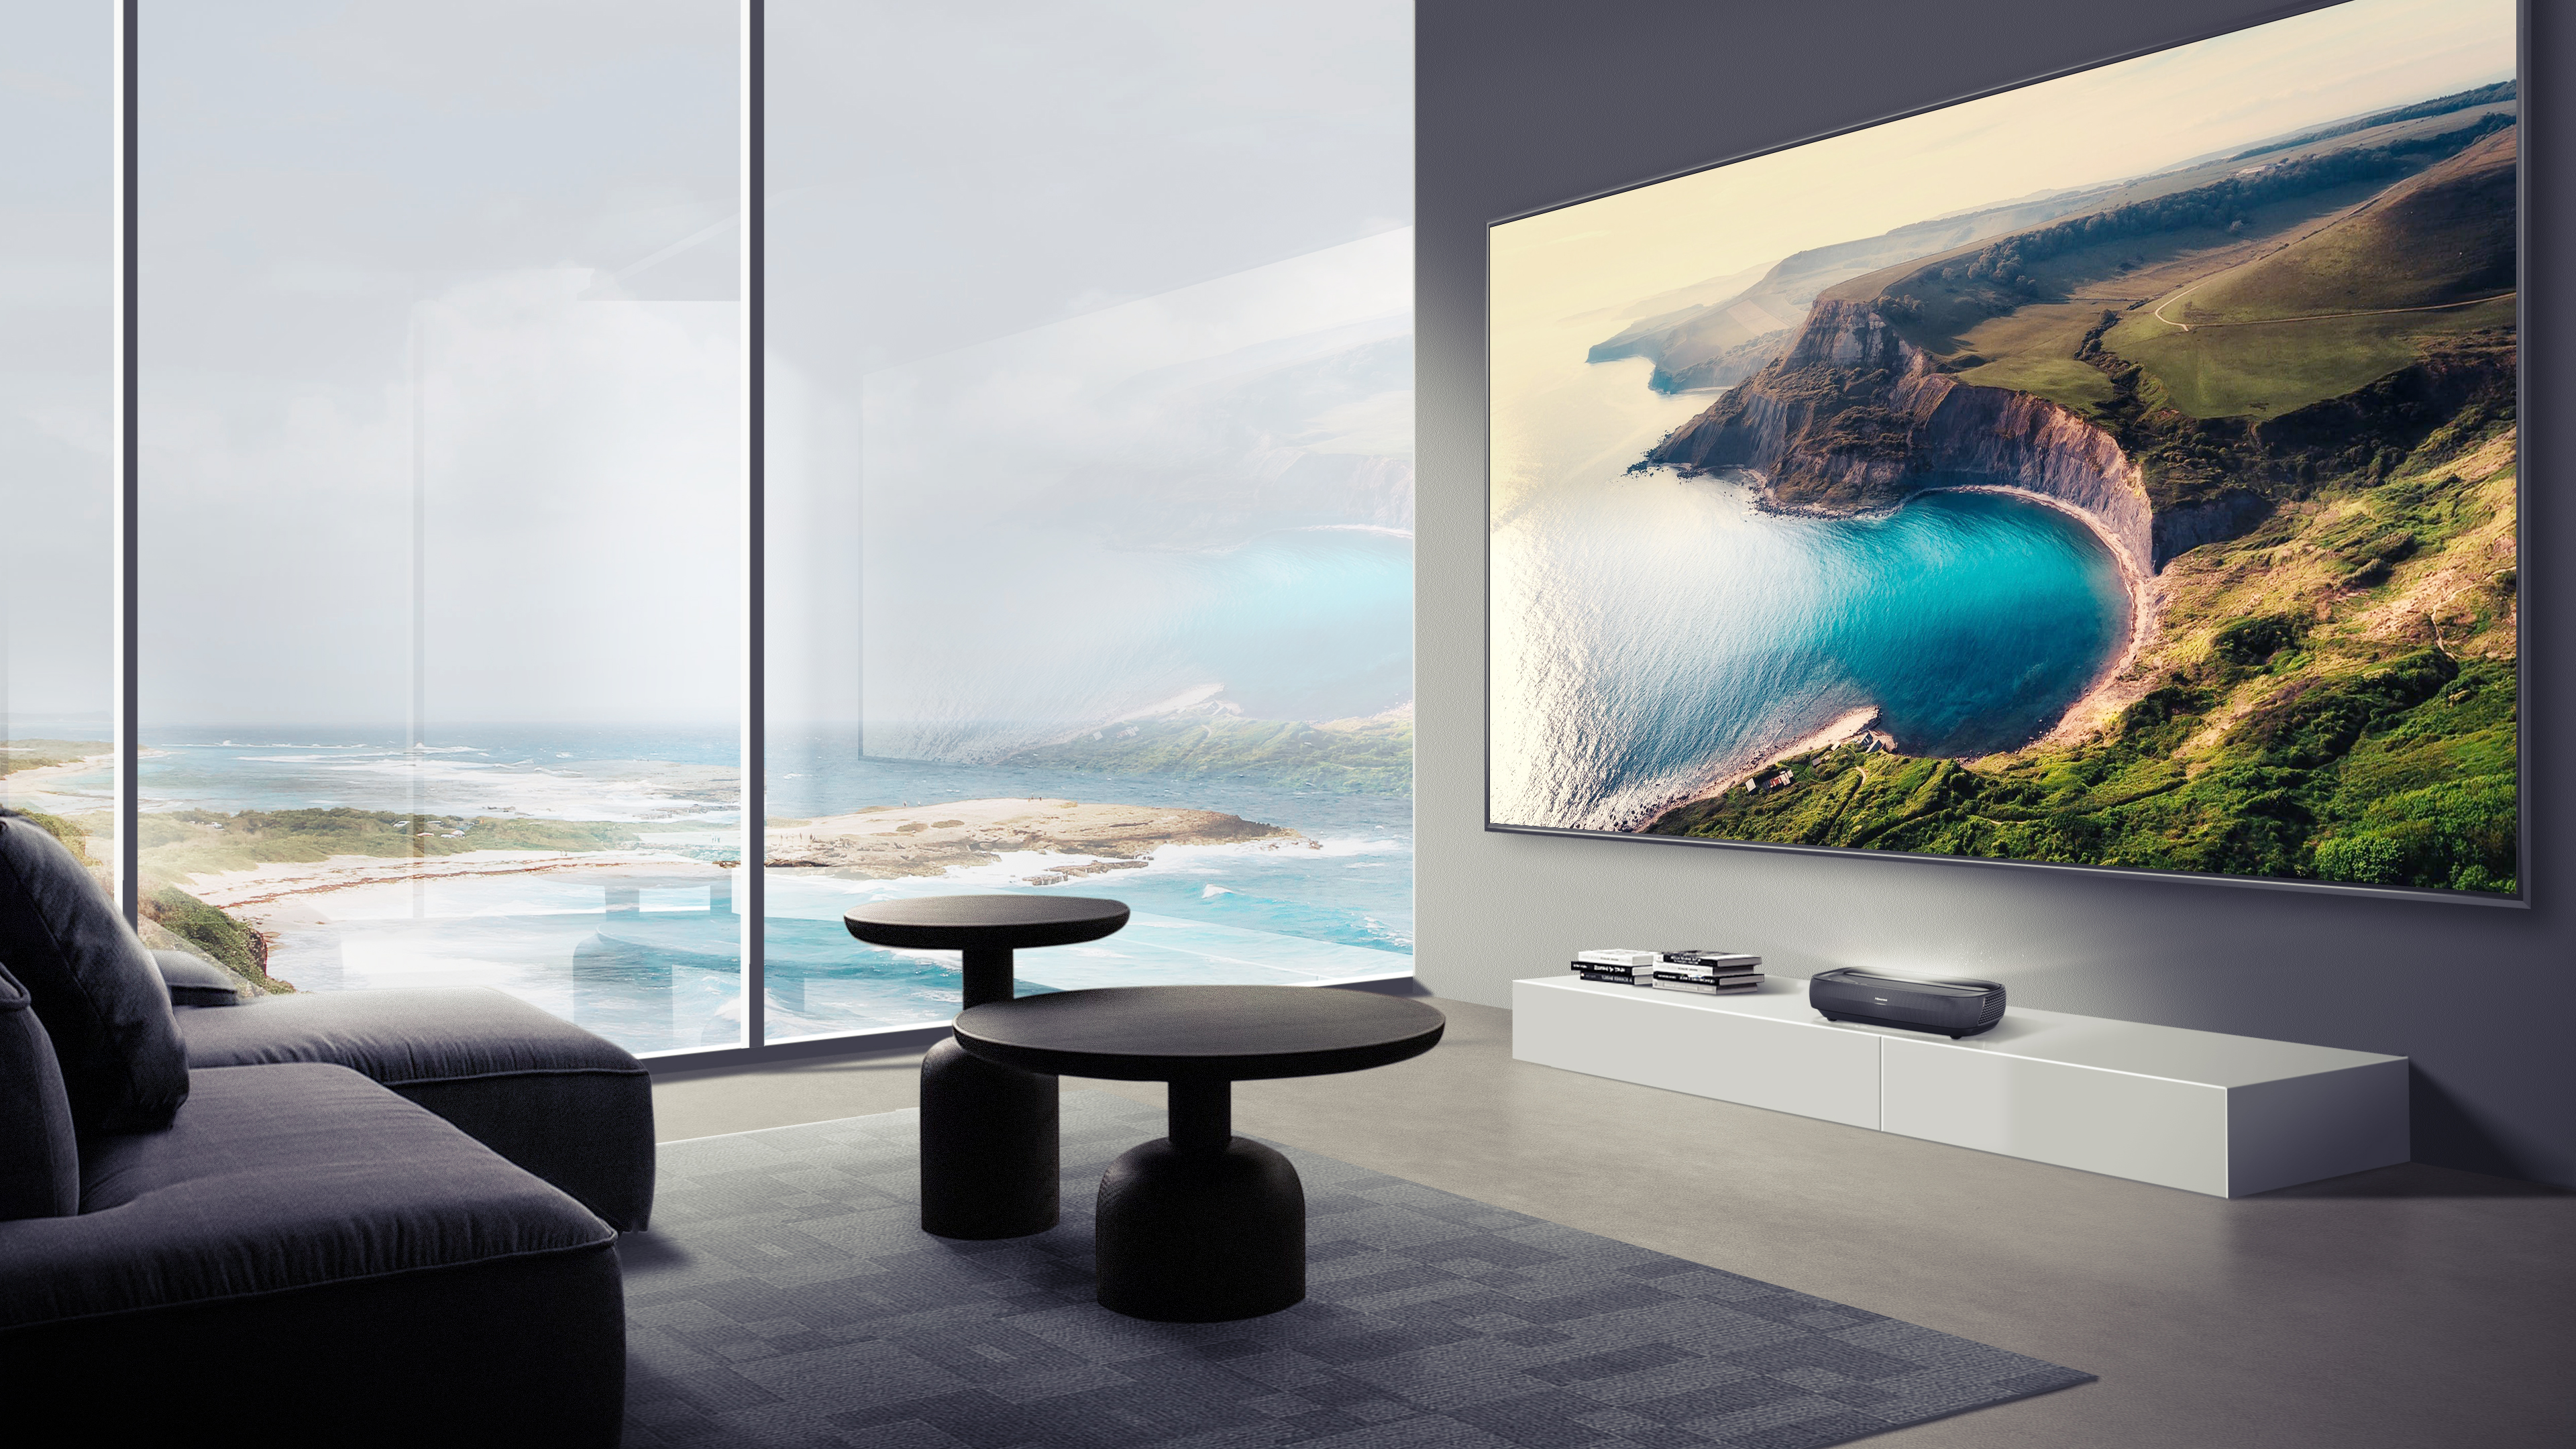 The Hisense L9G hanging in a grey front room with large windows